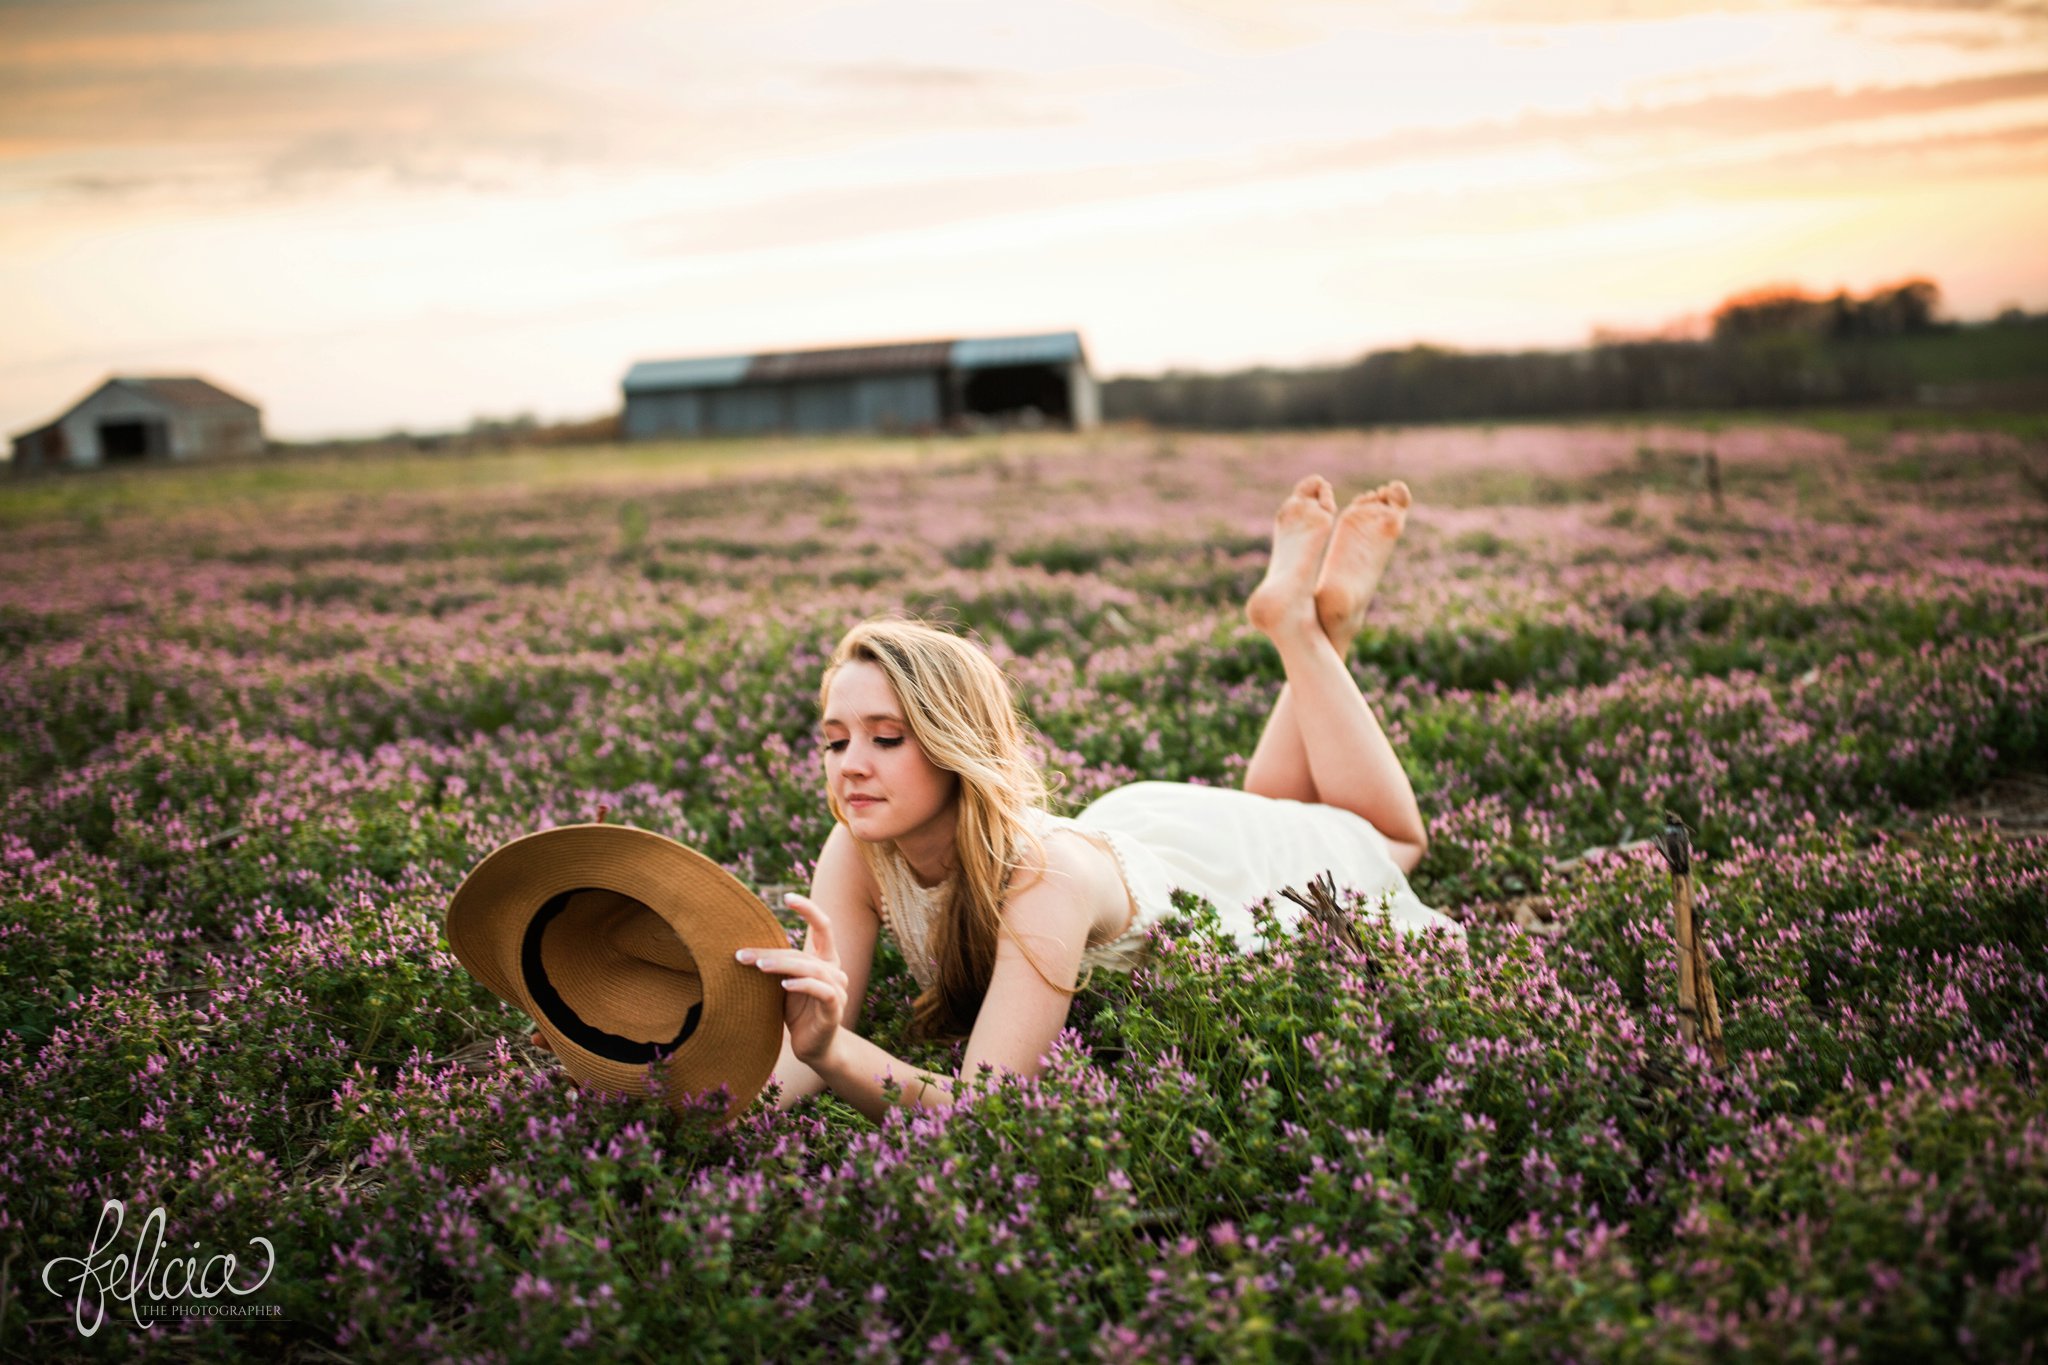 senior pictures | images by feliciathephotographer.com | Kansas City | rustic | long blonde hair | nature background | white dress | elegant | dramatic | candid | dramatic pose | flower field | sitting in flowers | purple flowers | lying in field | fedora hat | sunset | farm house 